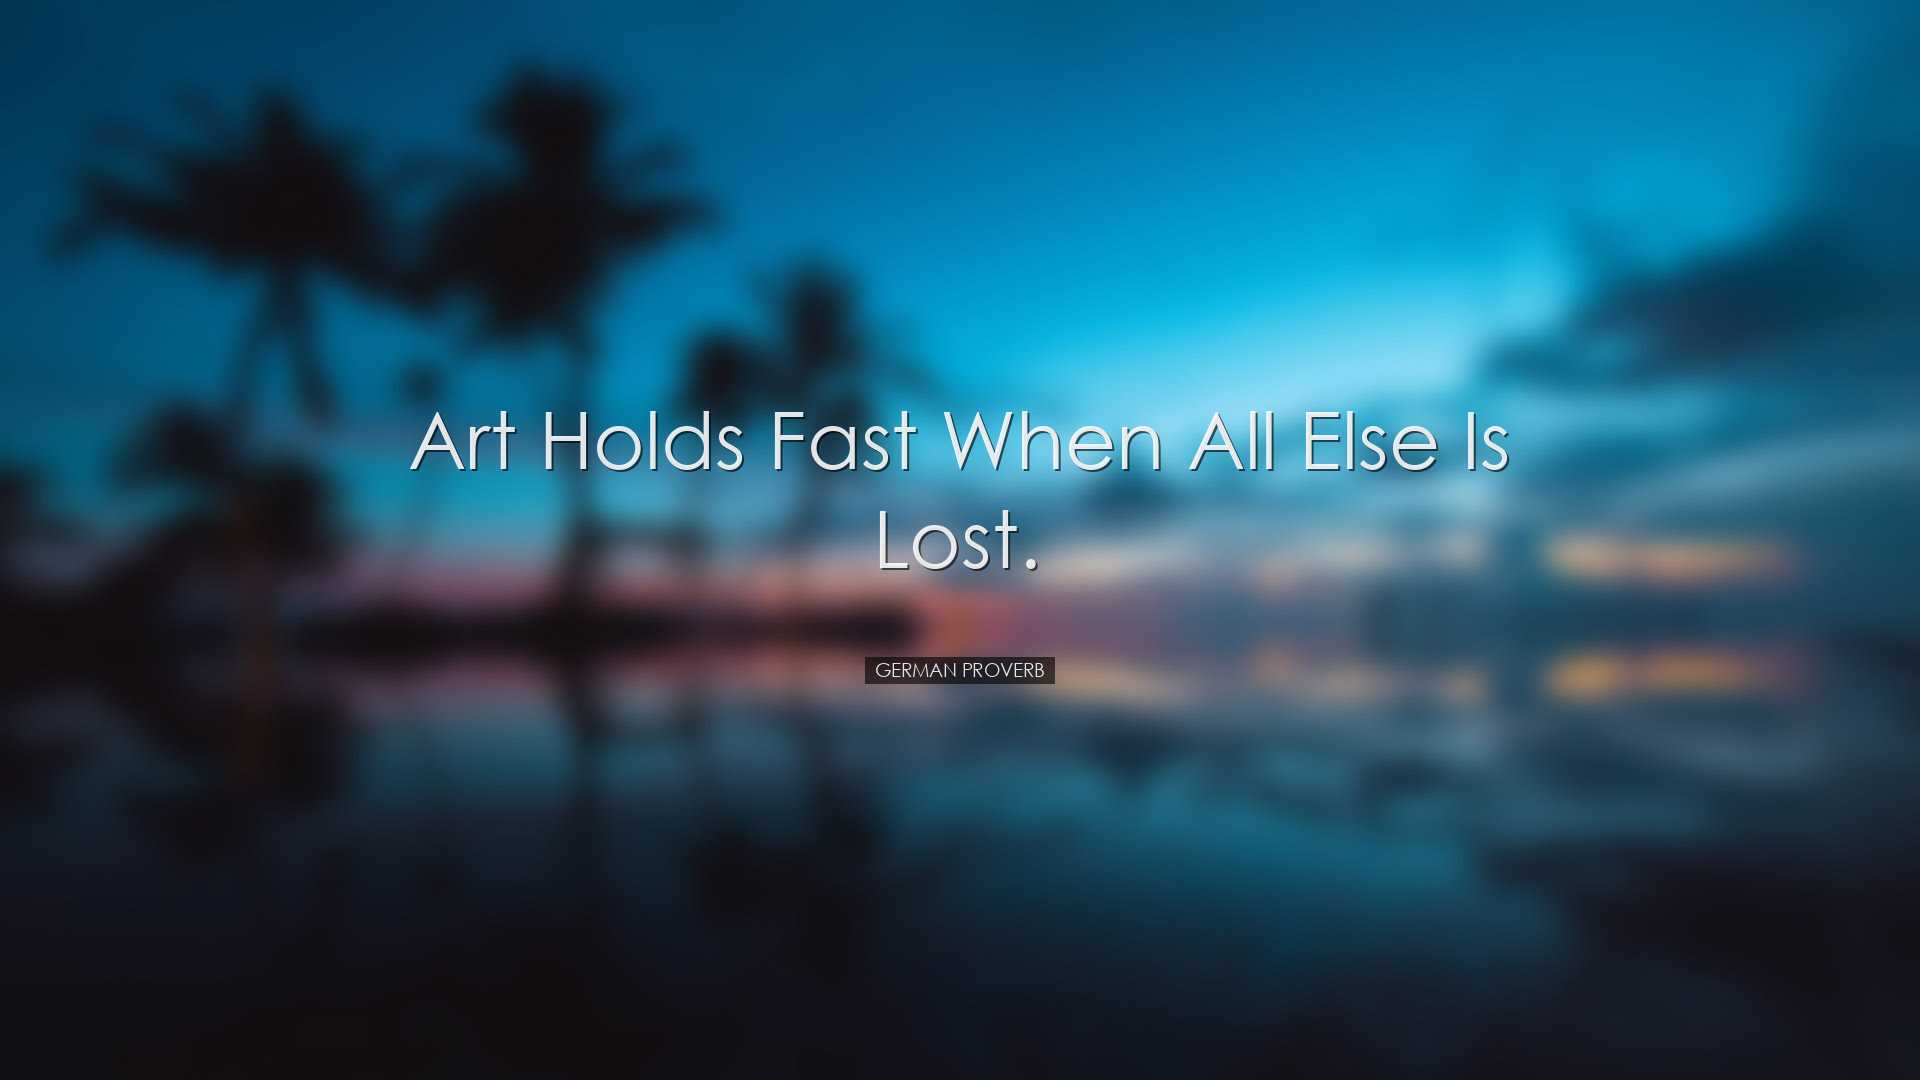 Art holds fast when all else is lost. - German Proverb